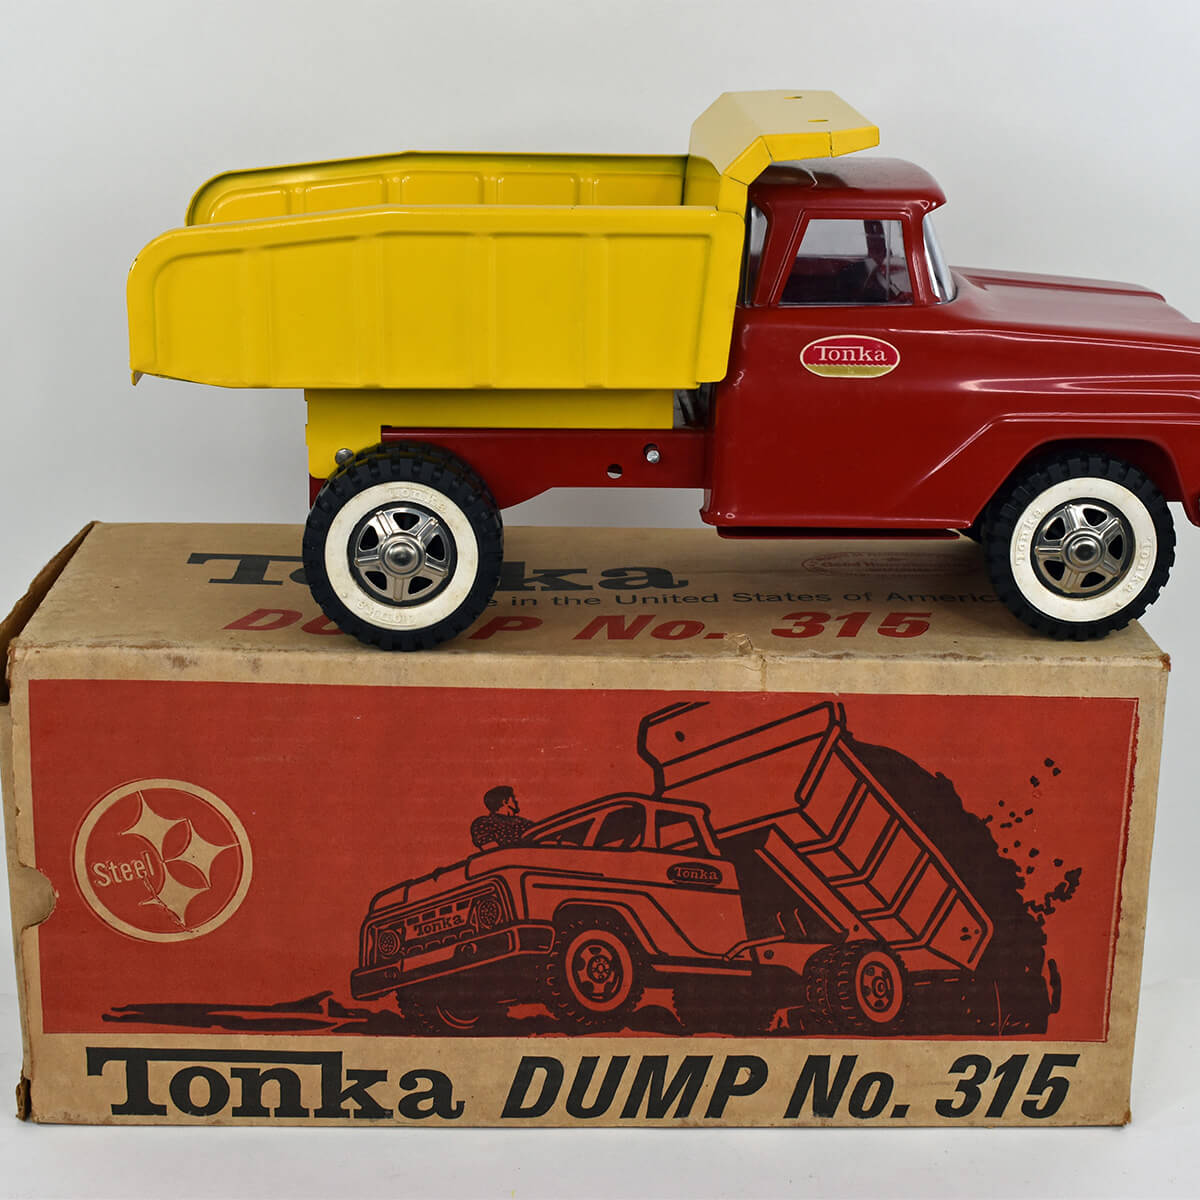 Rare and Vintage Toy Trucks for Serious Collectors